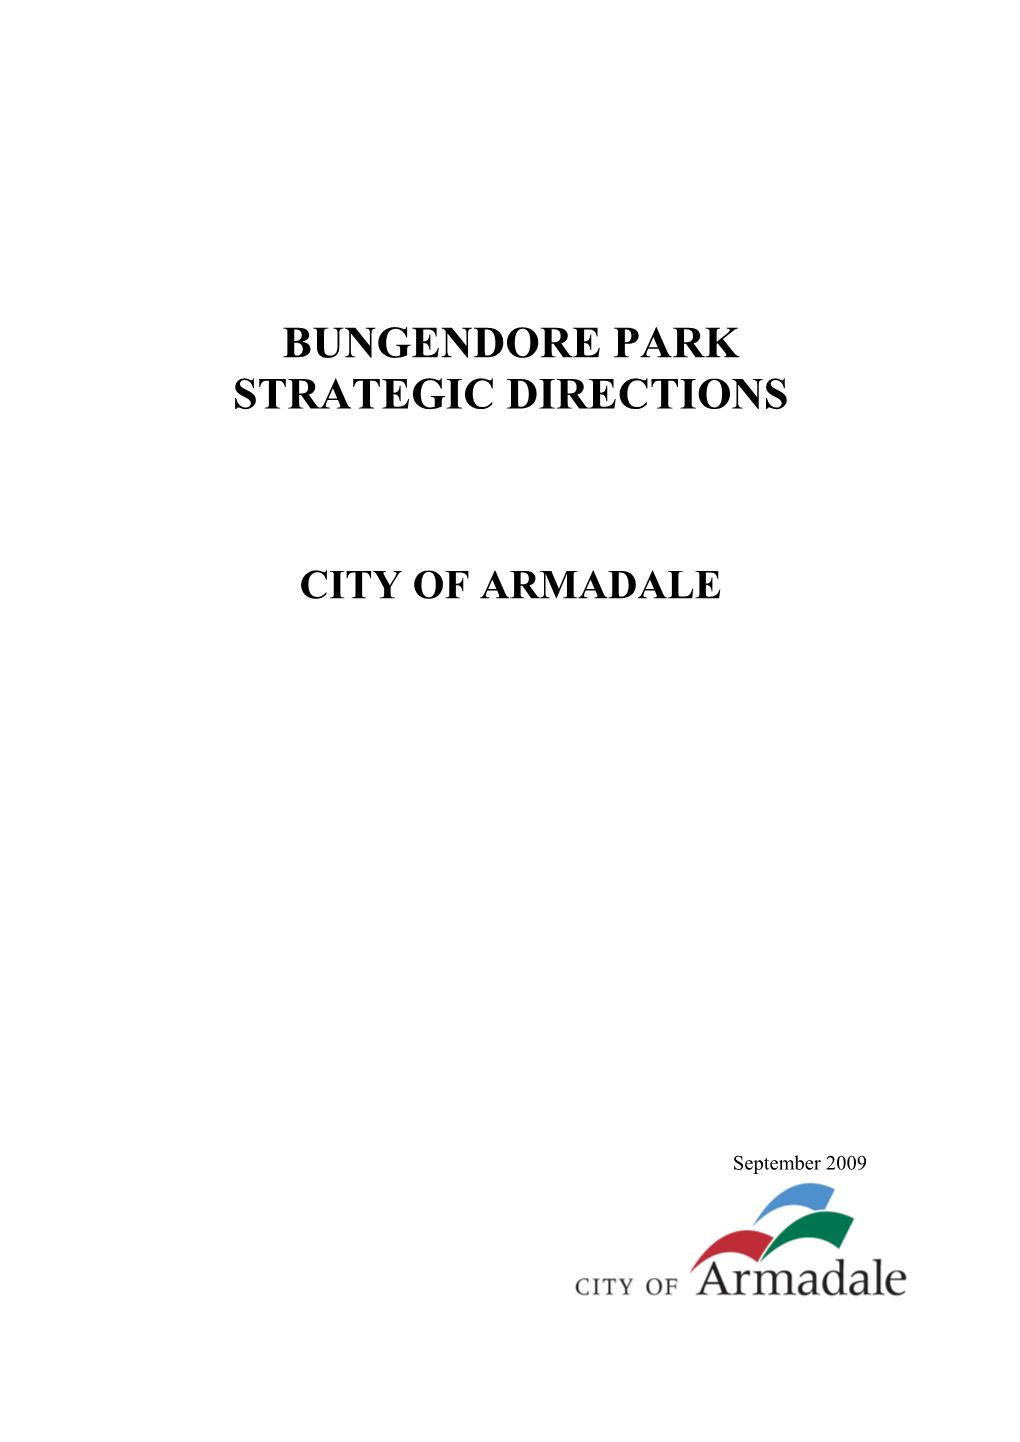 Bungendore Park Management Plan Was Endorsed by Council in 1997 for a Management Period of Ten Years